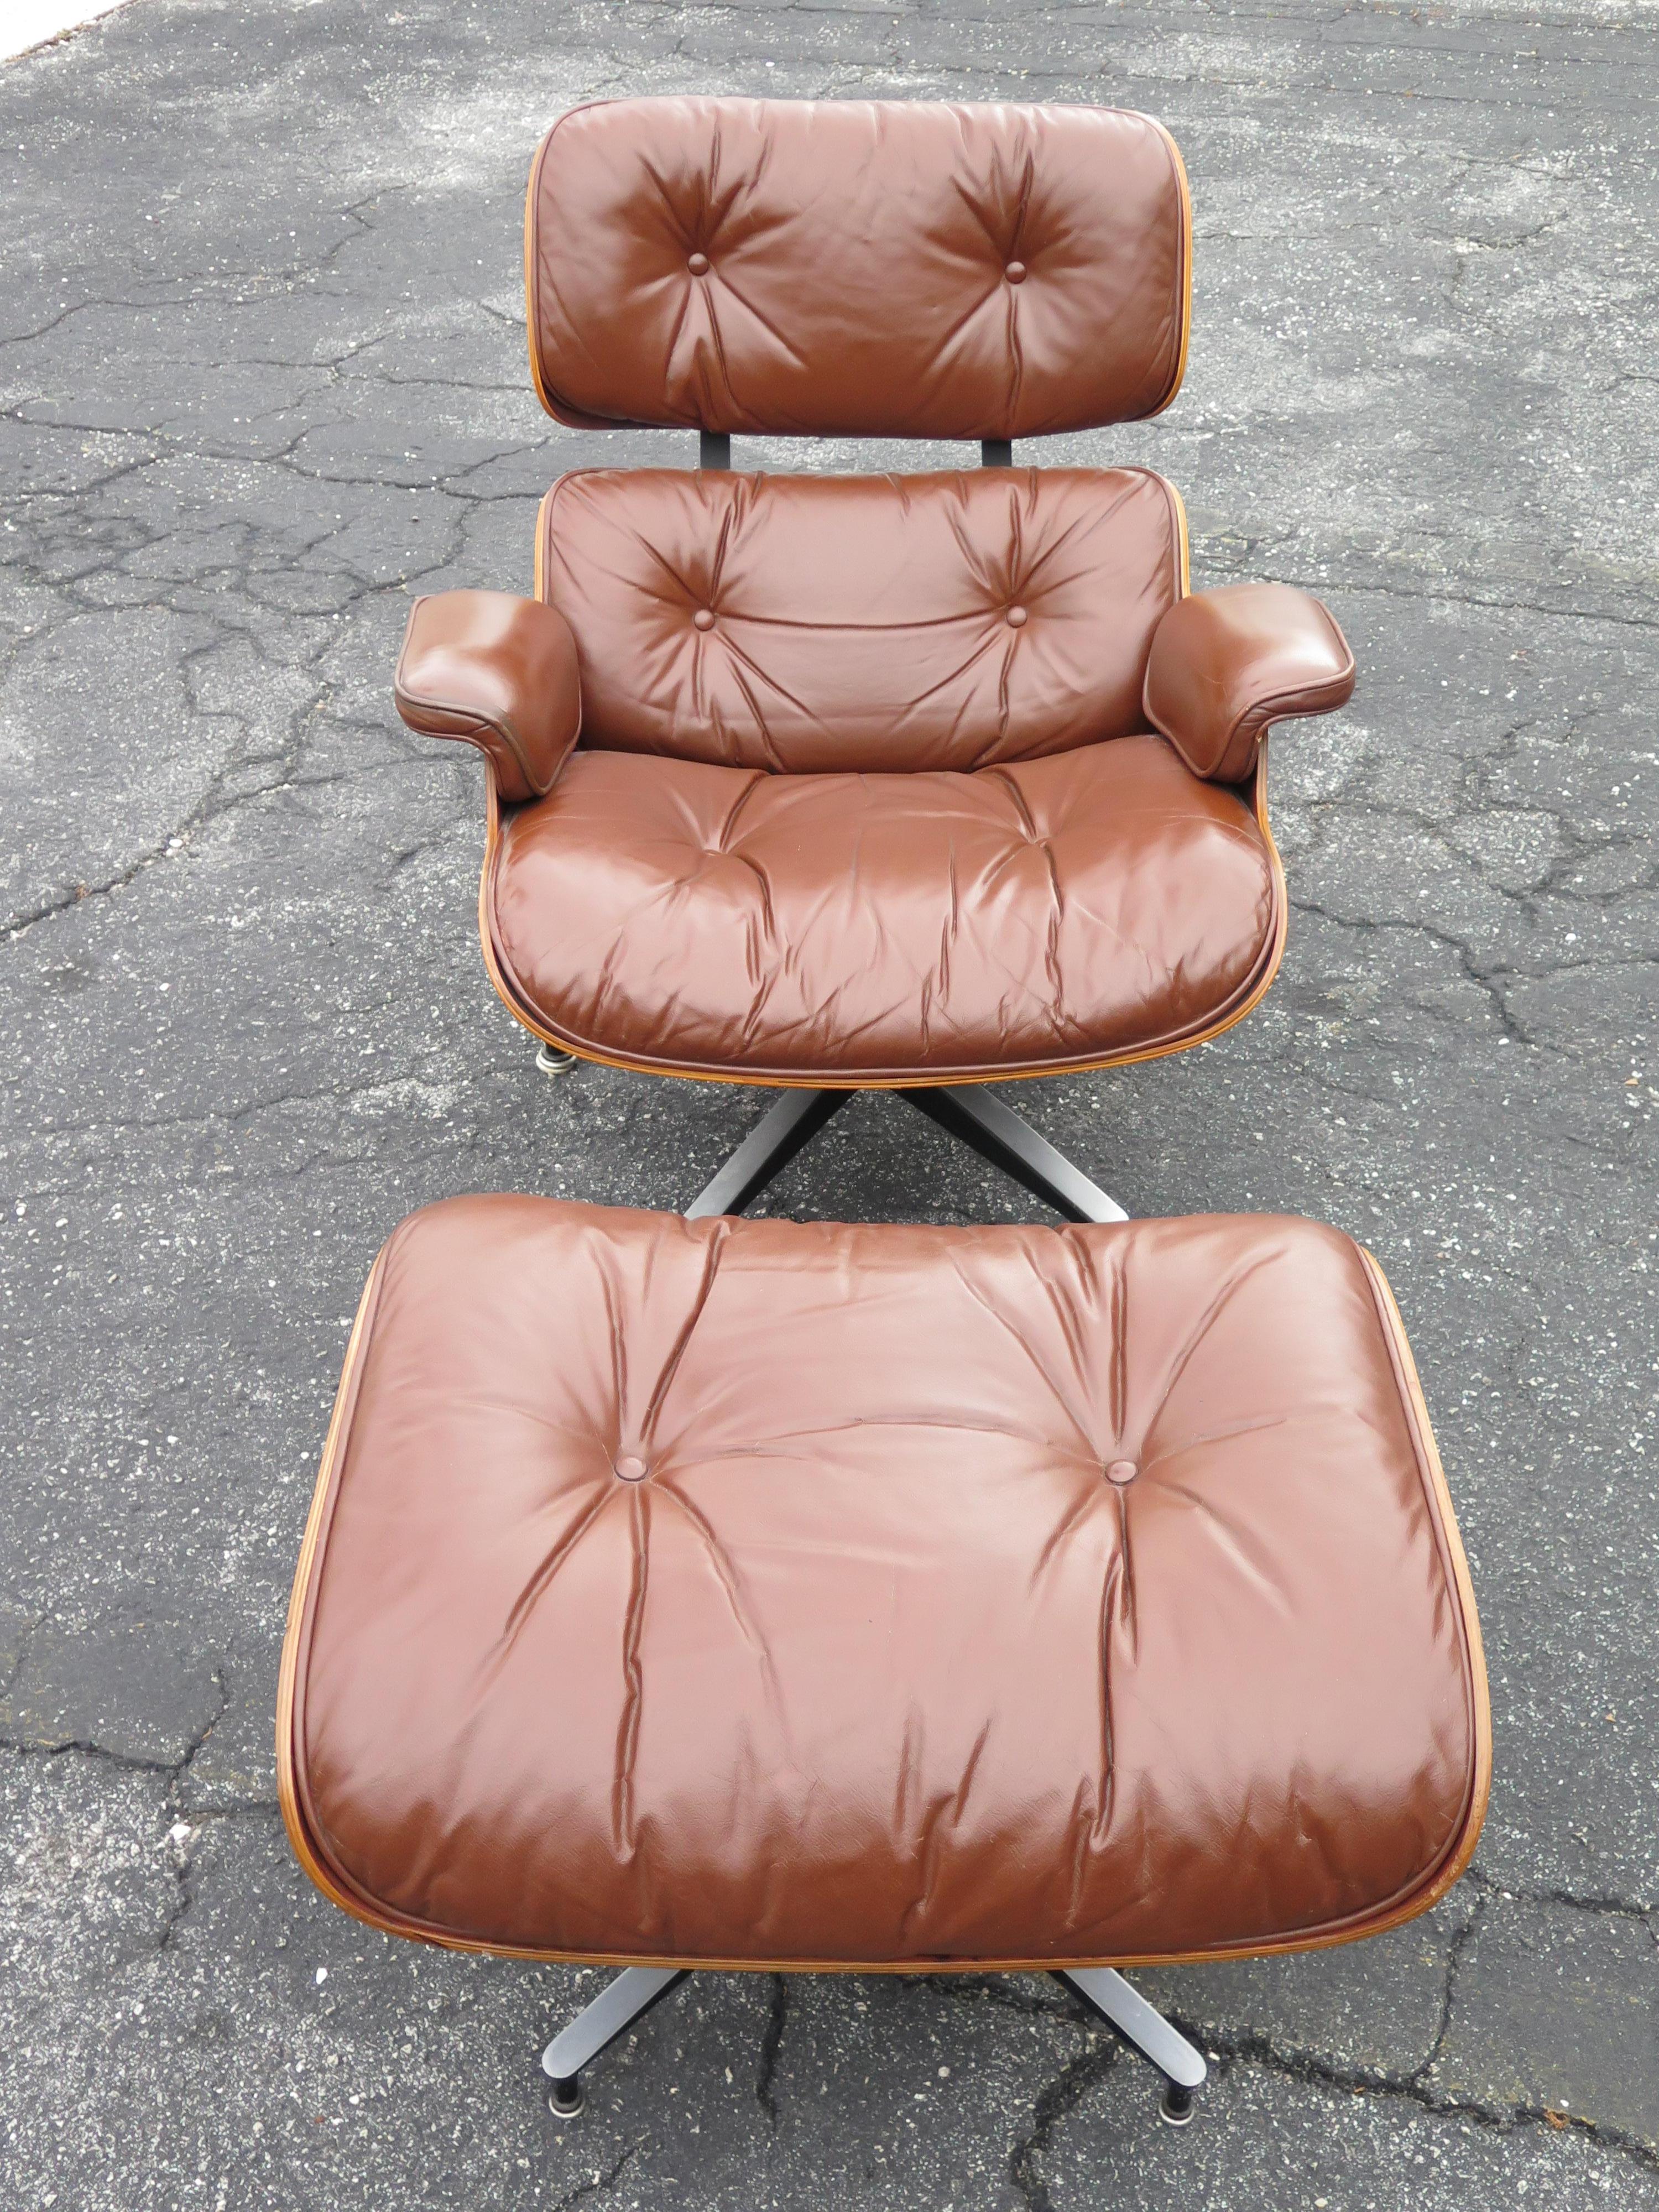  Classic Charles Eames Herman Miller Lounge Chair 1970's Cognac Brown Leather For Sale 8